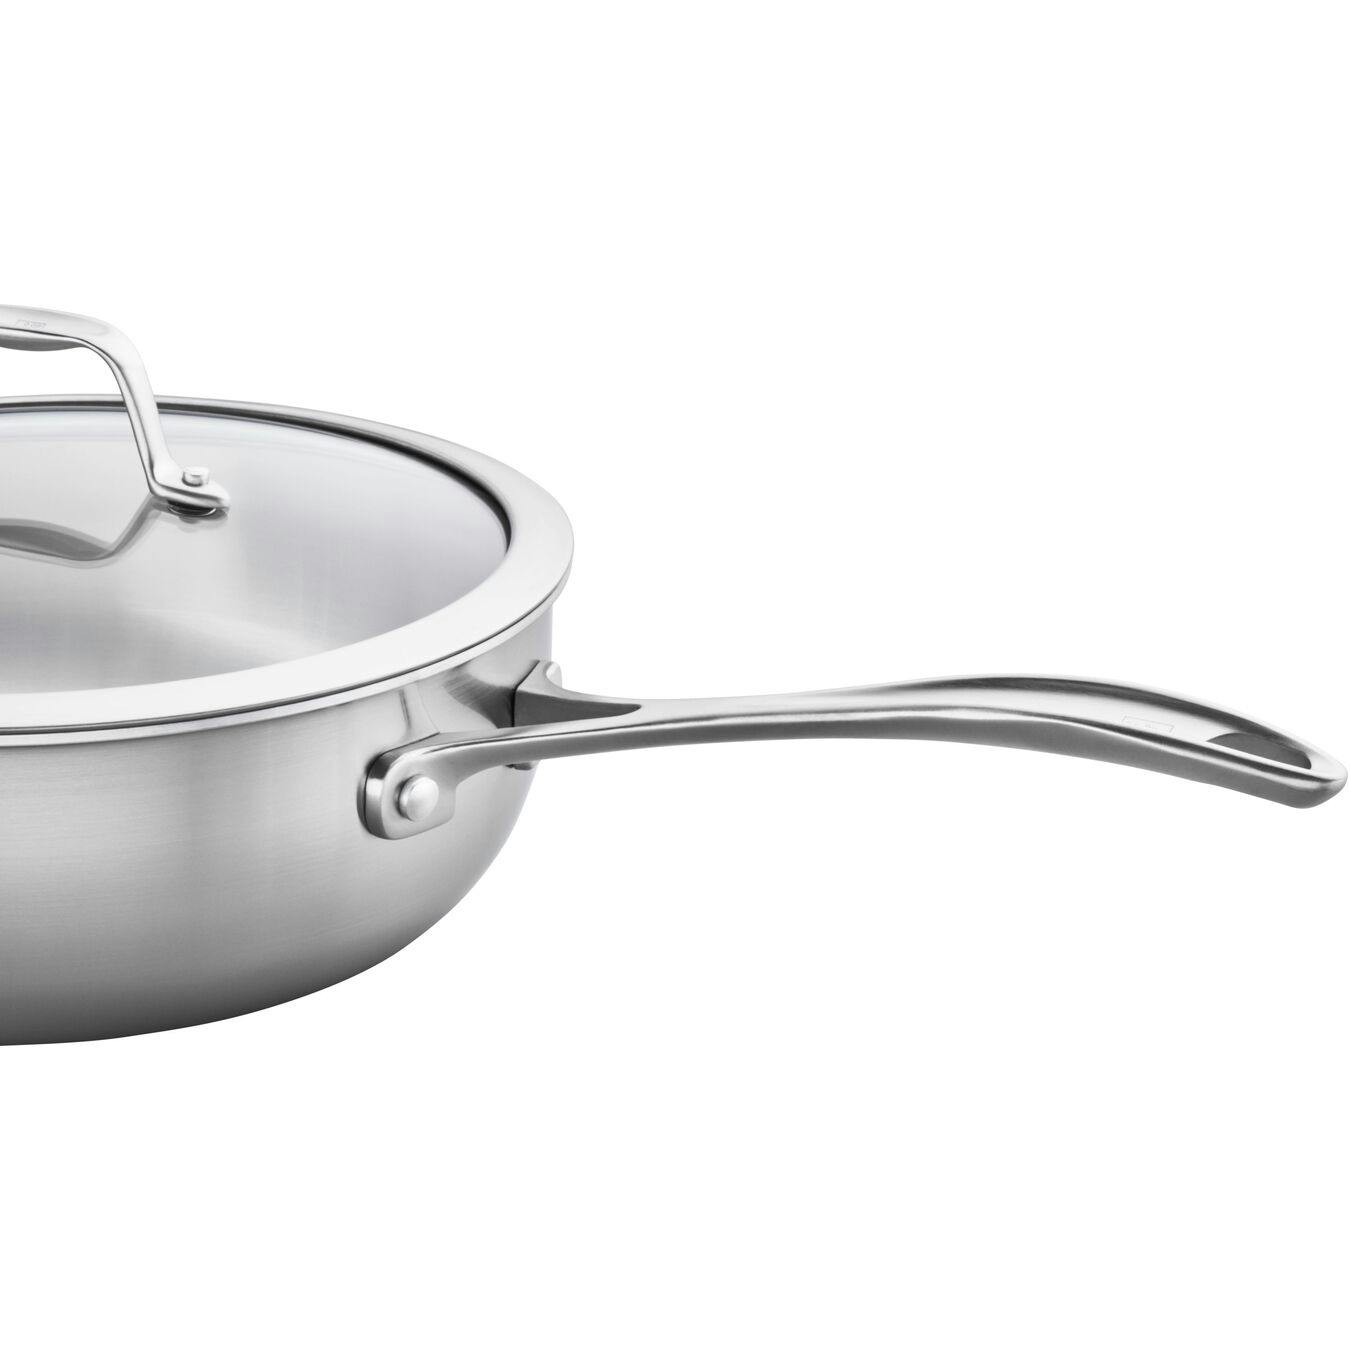 Zwilling Spirit 3-Ply 3 qt, Stainless Steel, Sauce Pan